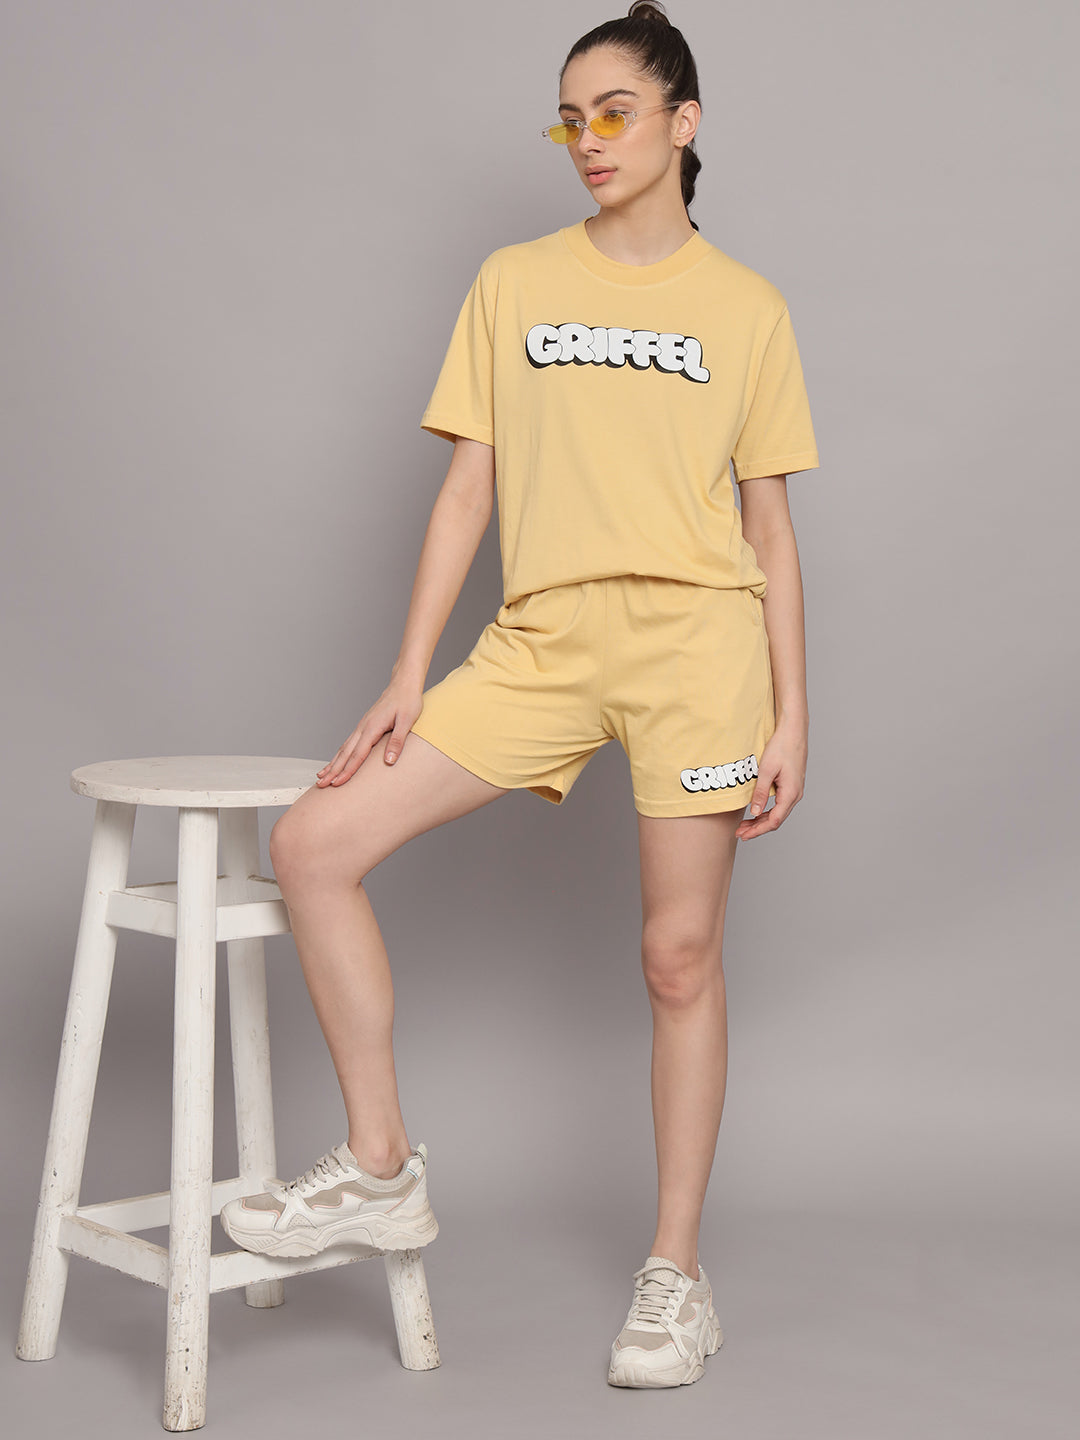 GRIFFEL Women Printed Loose fit Light Yellow T-shirt - griffel